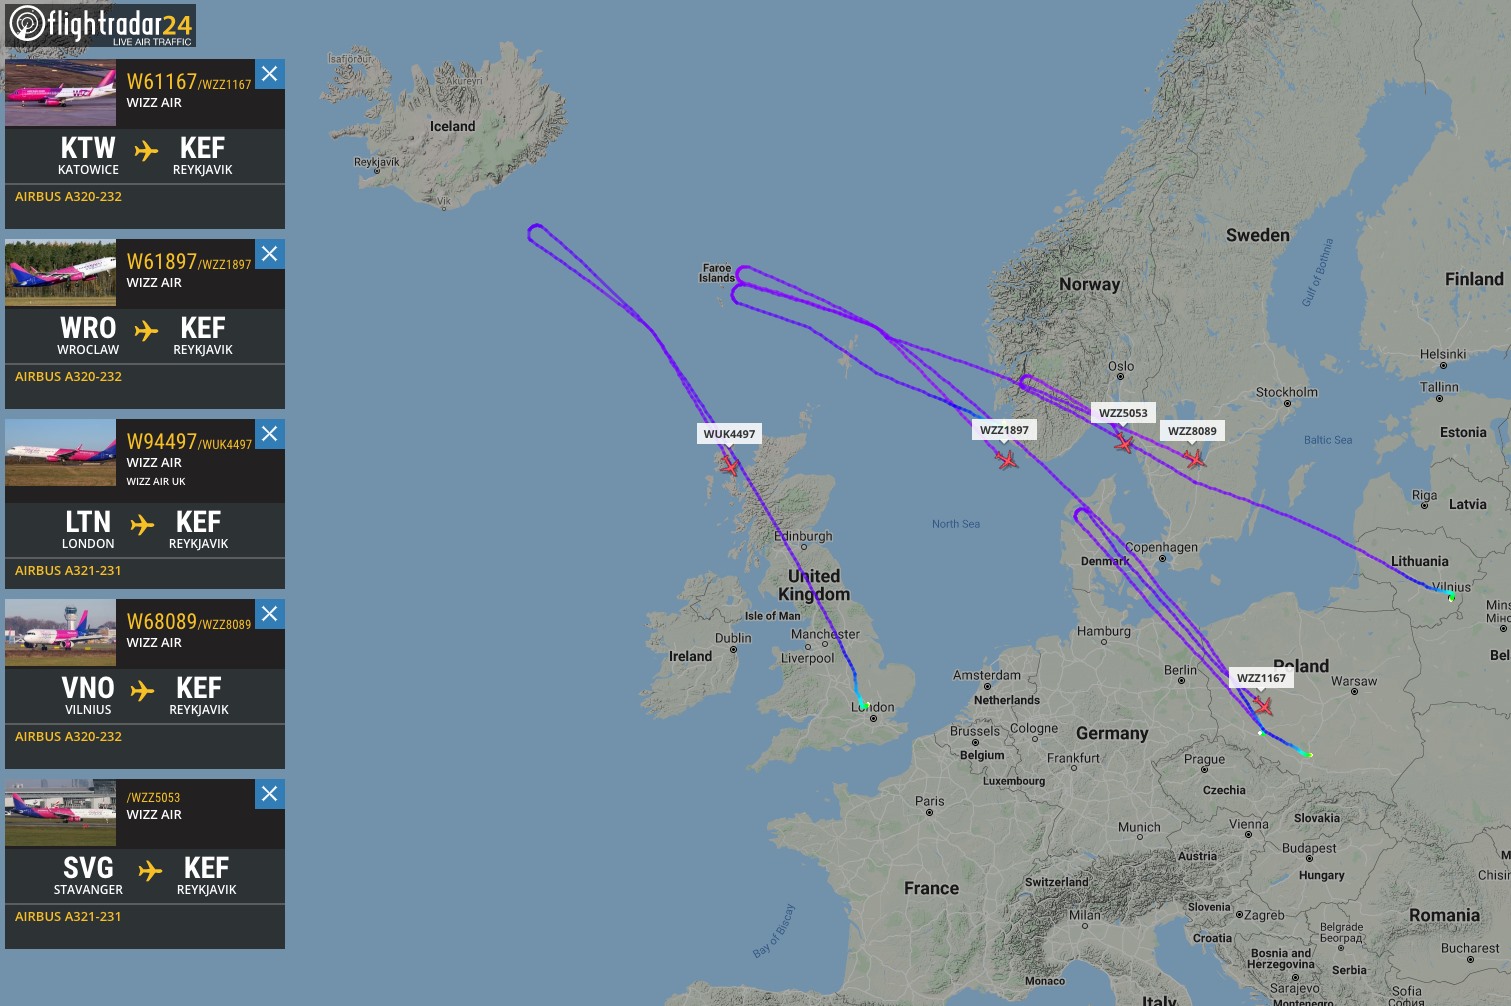 Five WizzAir flights diverted to airports of origin because of the accident in Keflavik // Source: Flightradar24